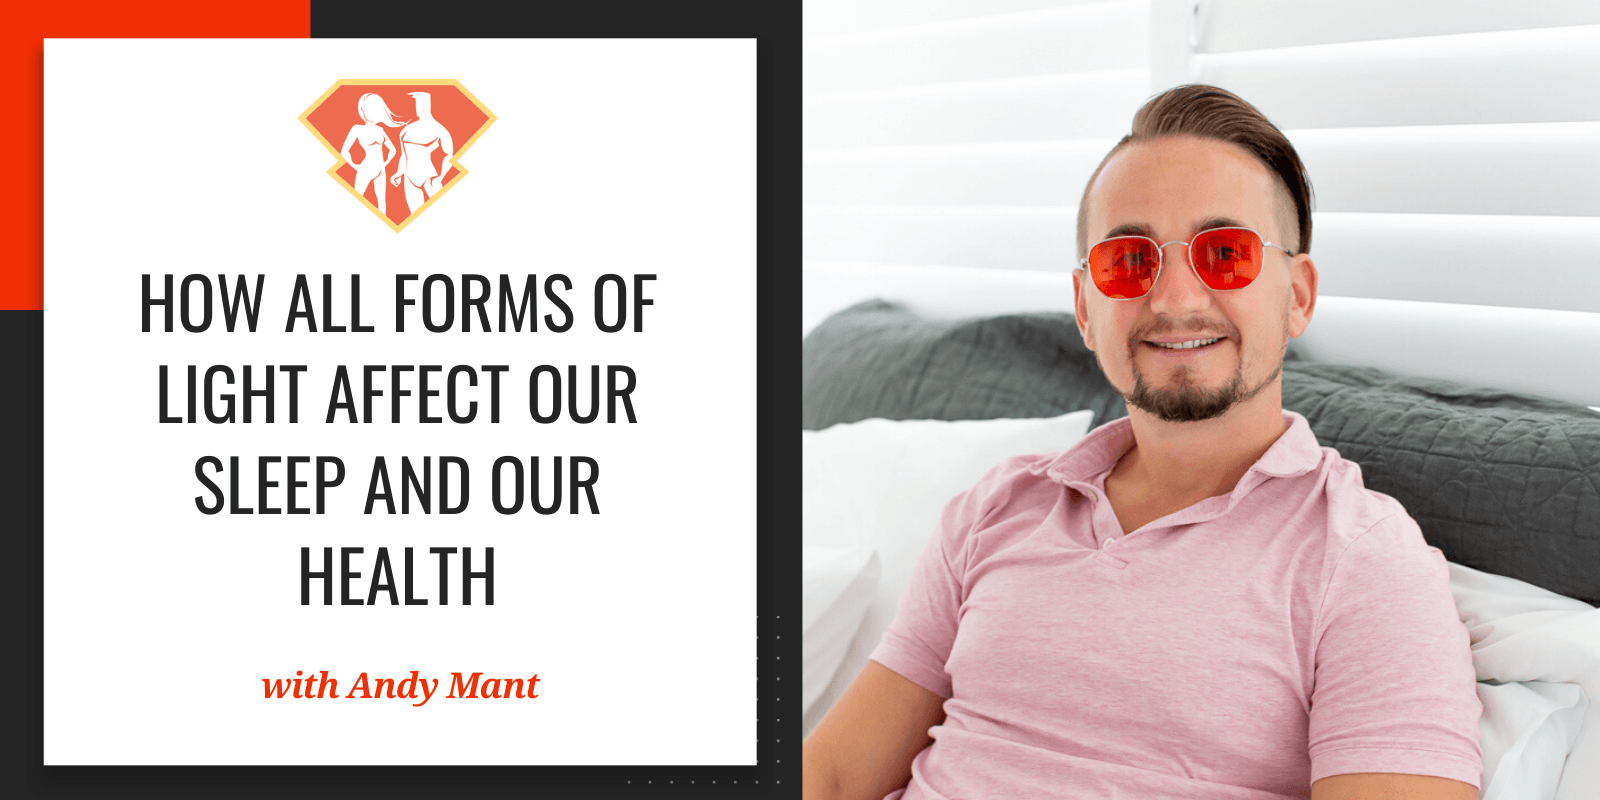 In this episode with Andy Mant, we go deep into how all forms of light affect out sleep and health in general, be it blue light, sunlight, or anything else.